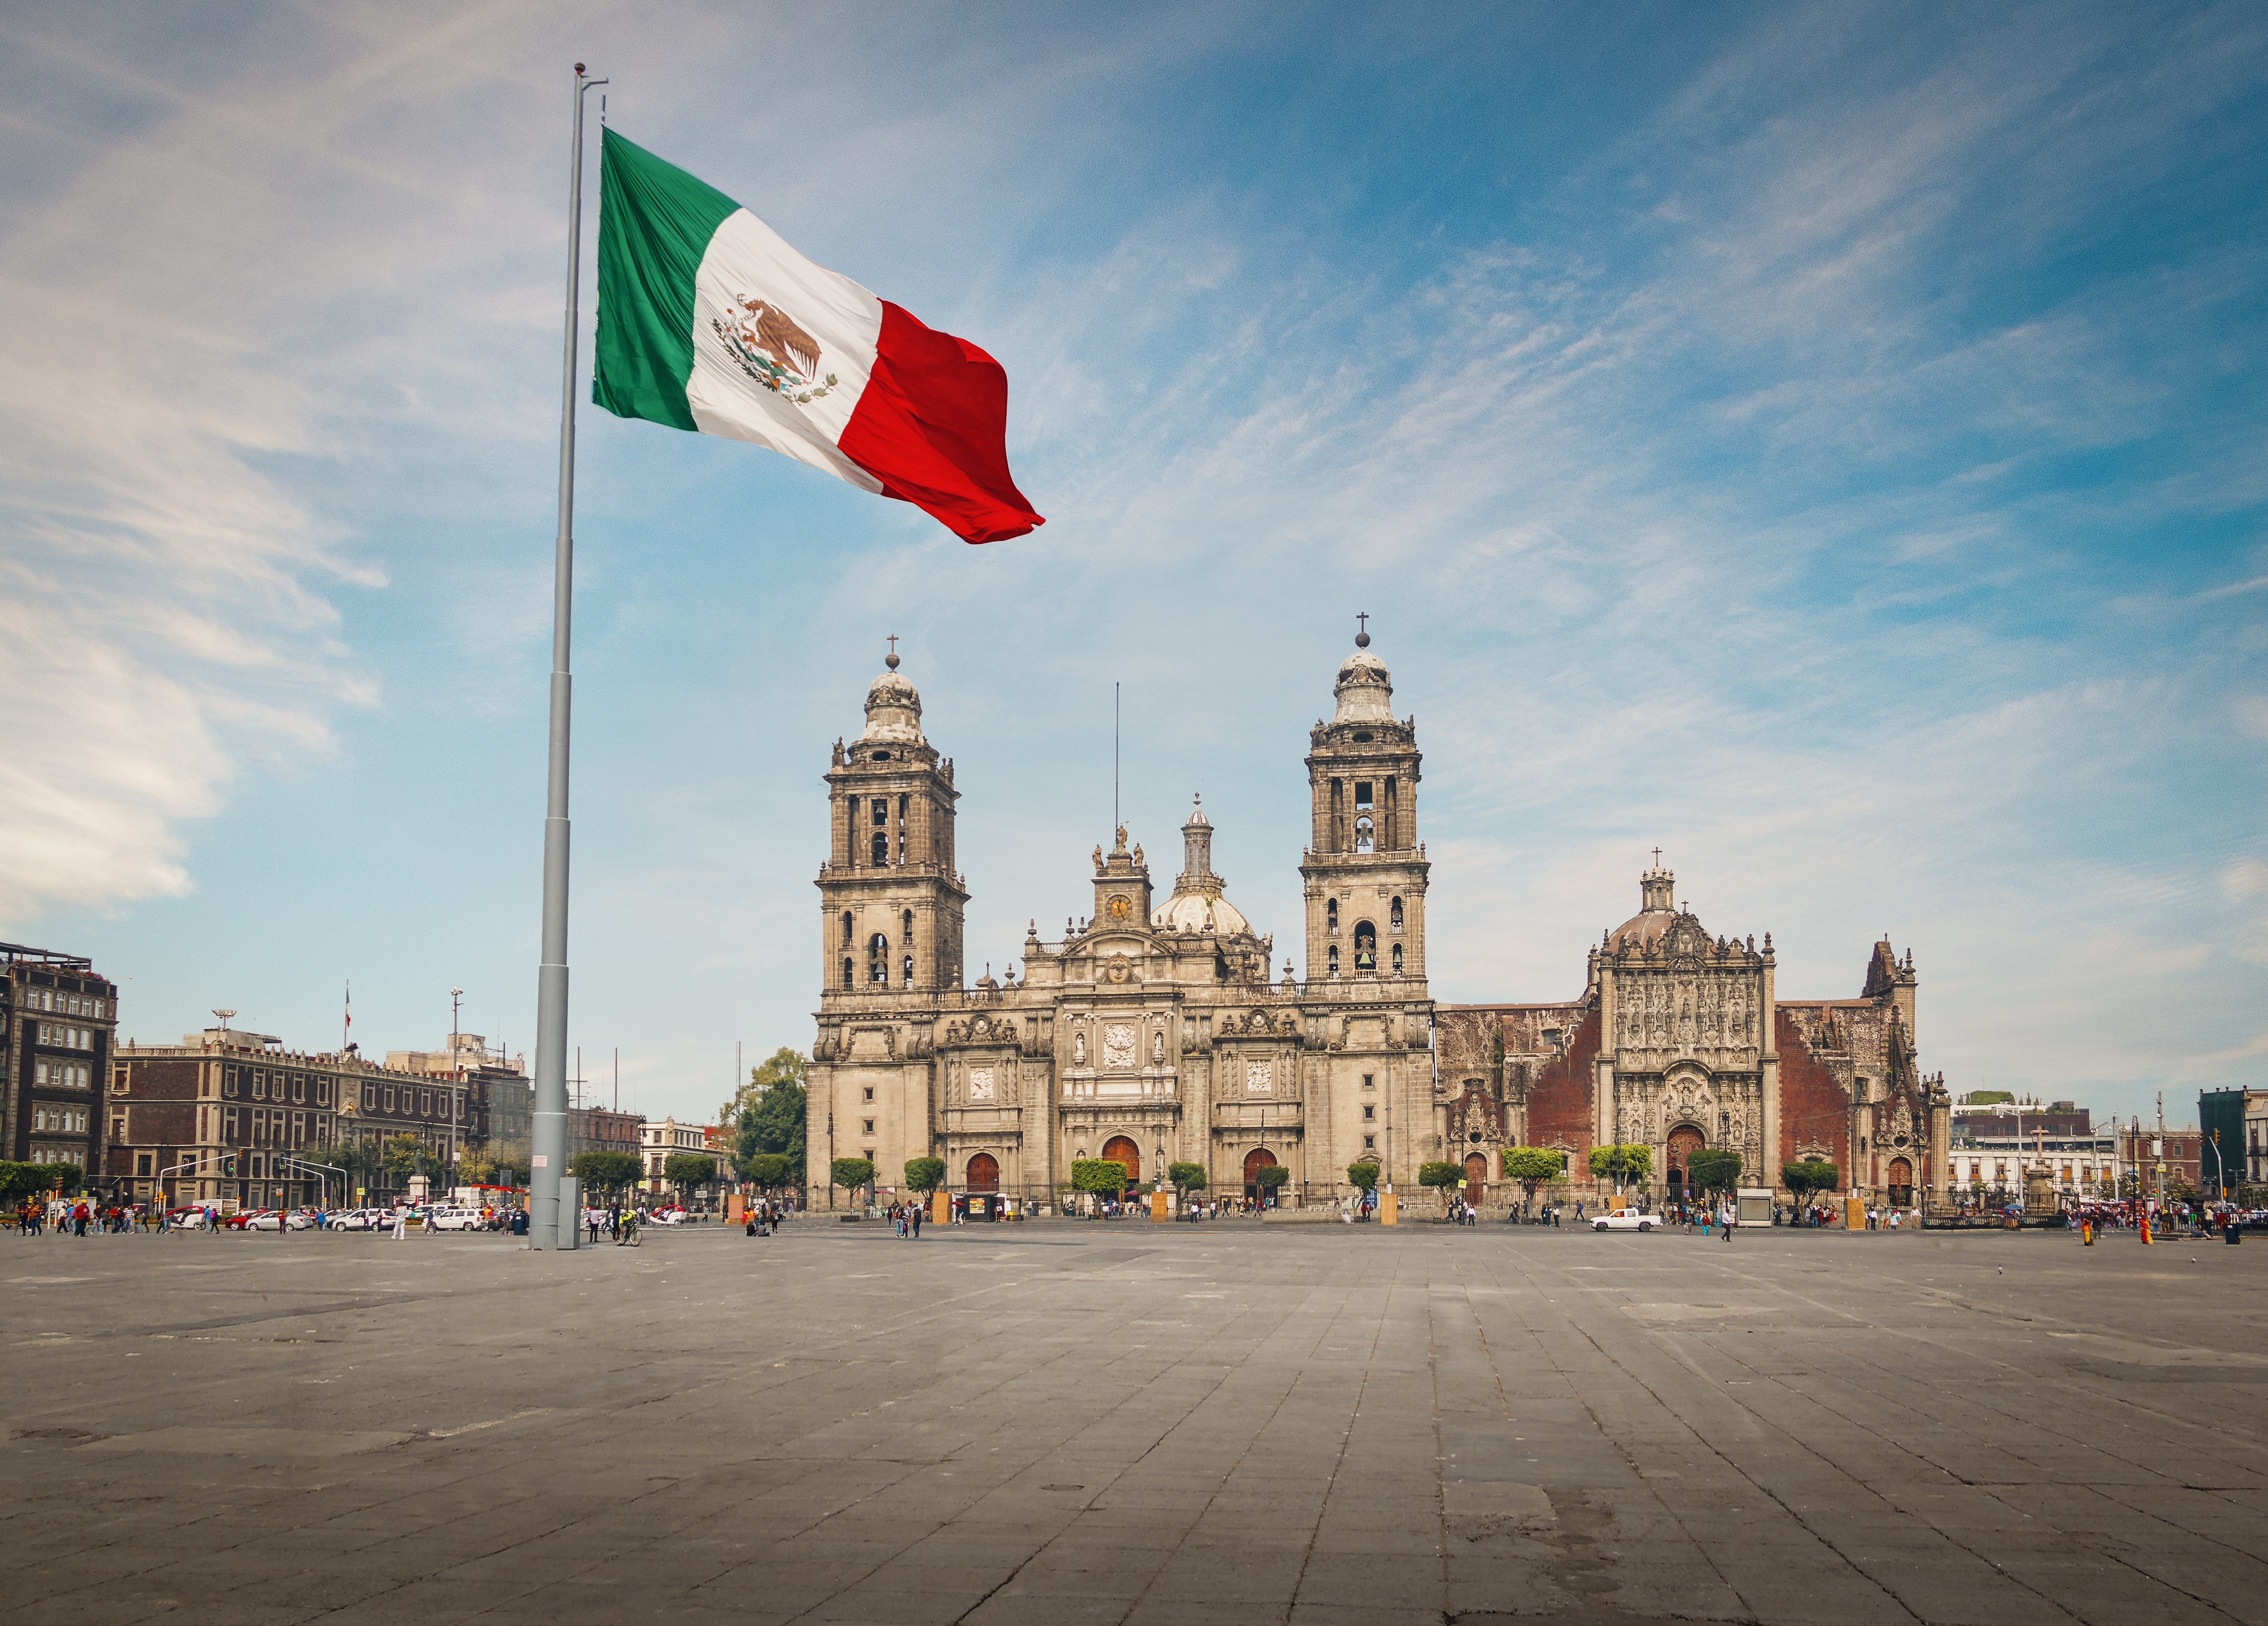 Zocalo Square and Mexico City Cathedral